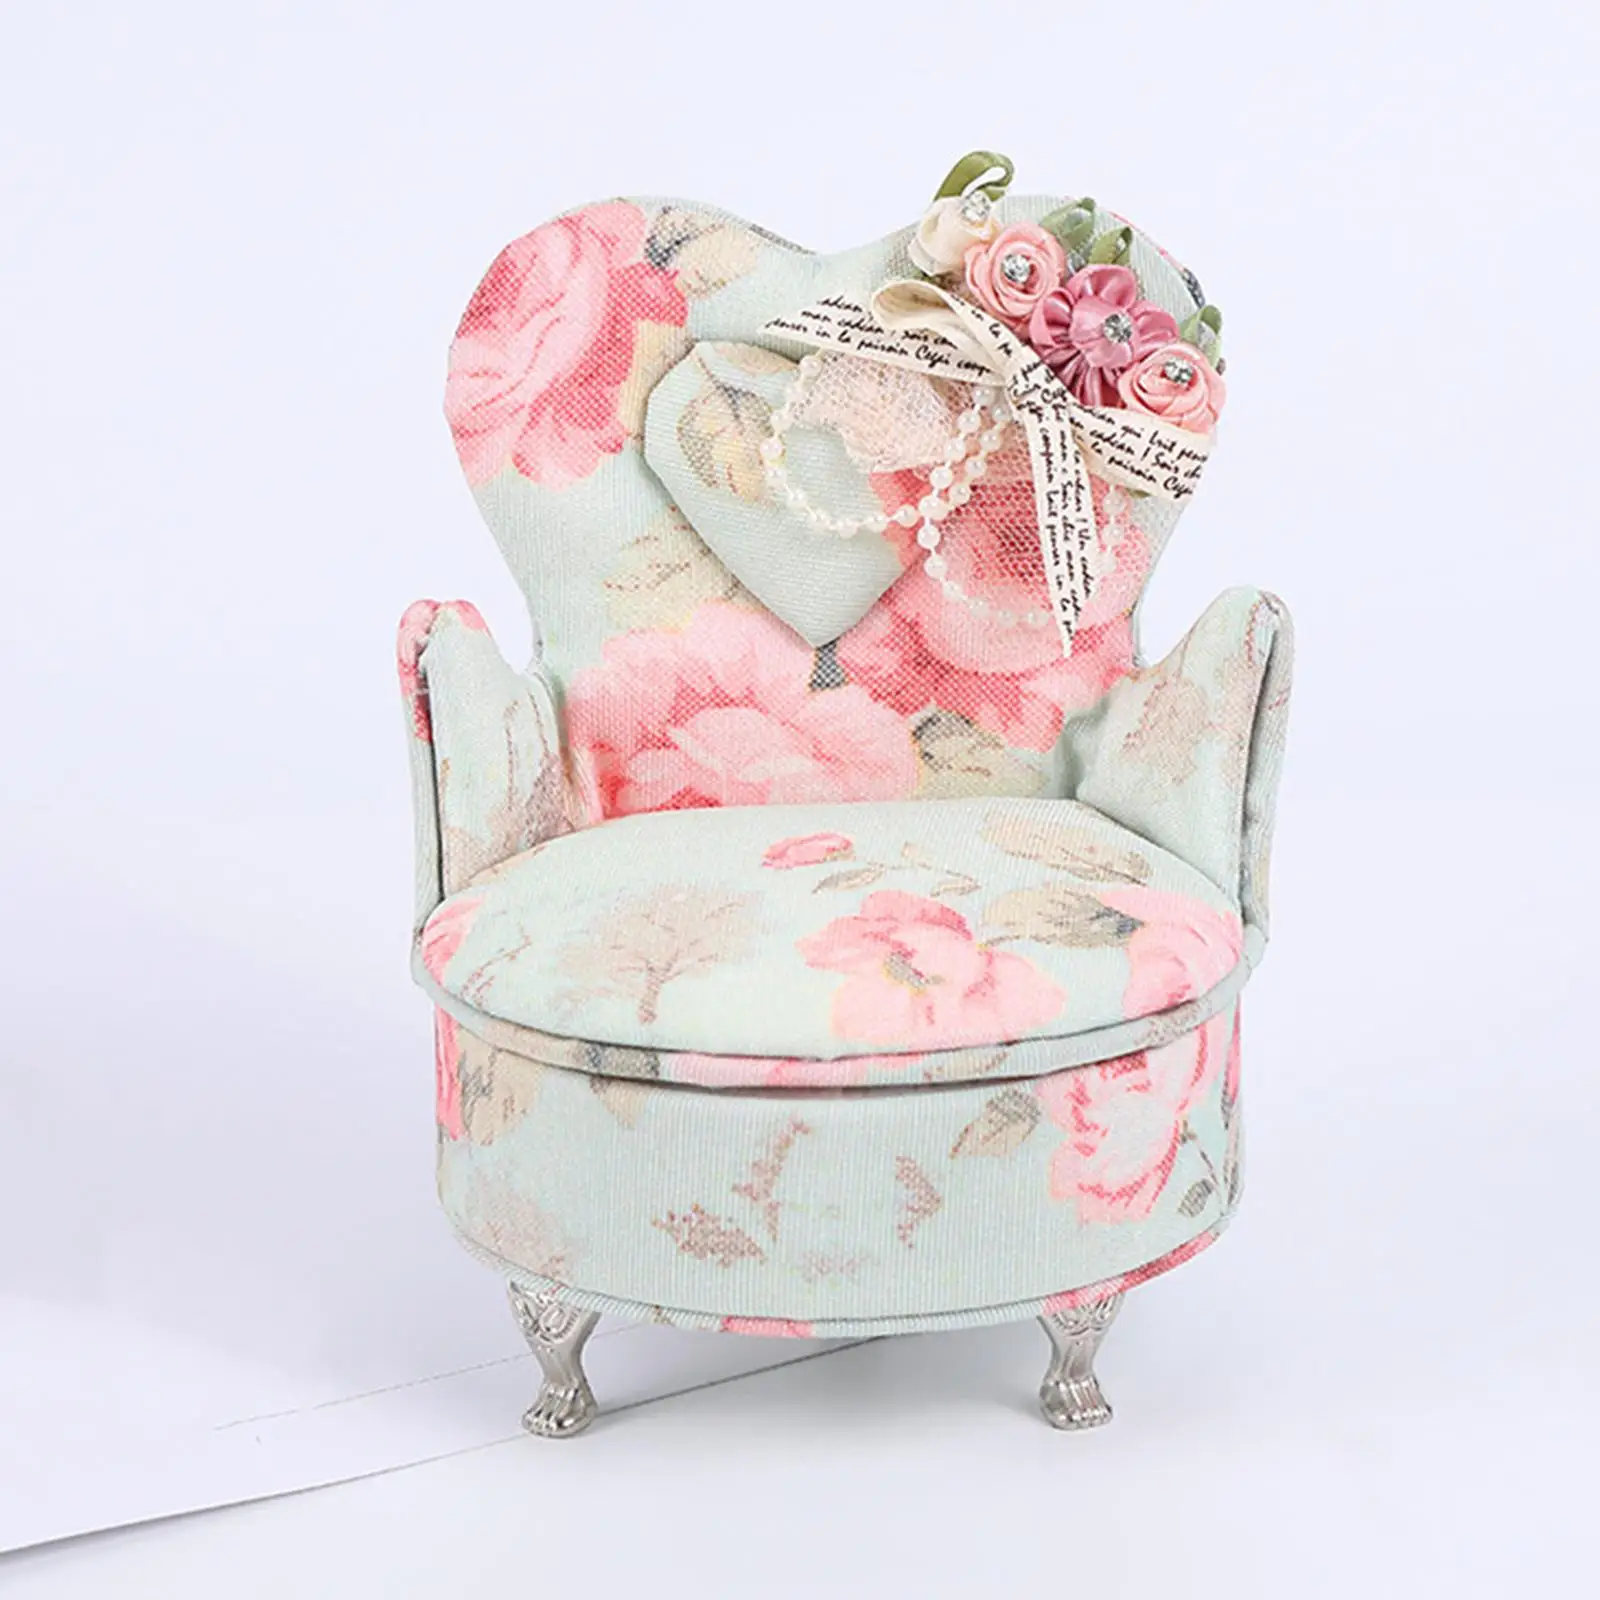 1/6 Dollhouse Doll Furniture Sofa Toys Holiday Gifts for Kids Dollhosue Decor Living Room Ornaments Jewelry Box Organizer